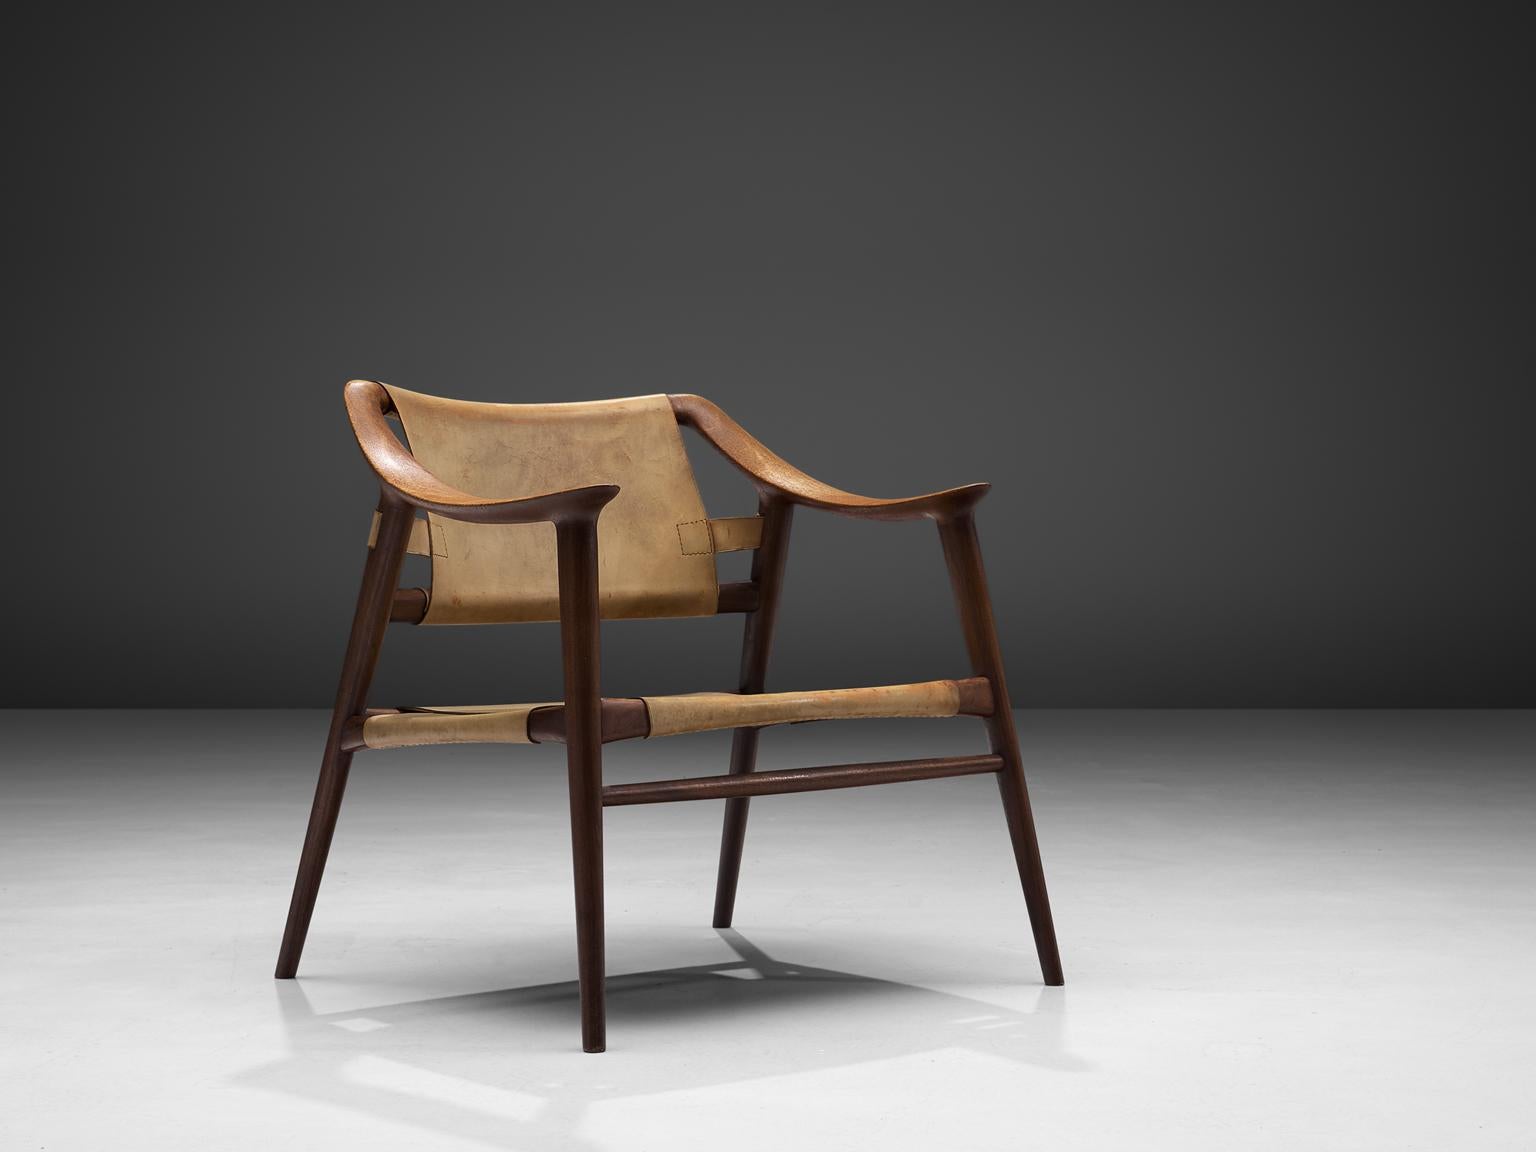 Rolf Rastad & Adolf Relling for Gustav Bahus armchair model 56/2 'Bambi', teak and leather, Norway, circa 1954. 

Excellent example of the 'Bambi' chair of Rolf Rastad and Adolf Reling. This edition consist of a teak frame and light beige leather